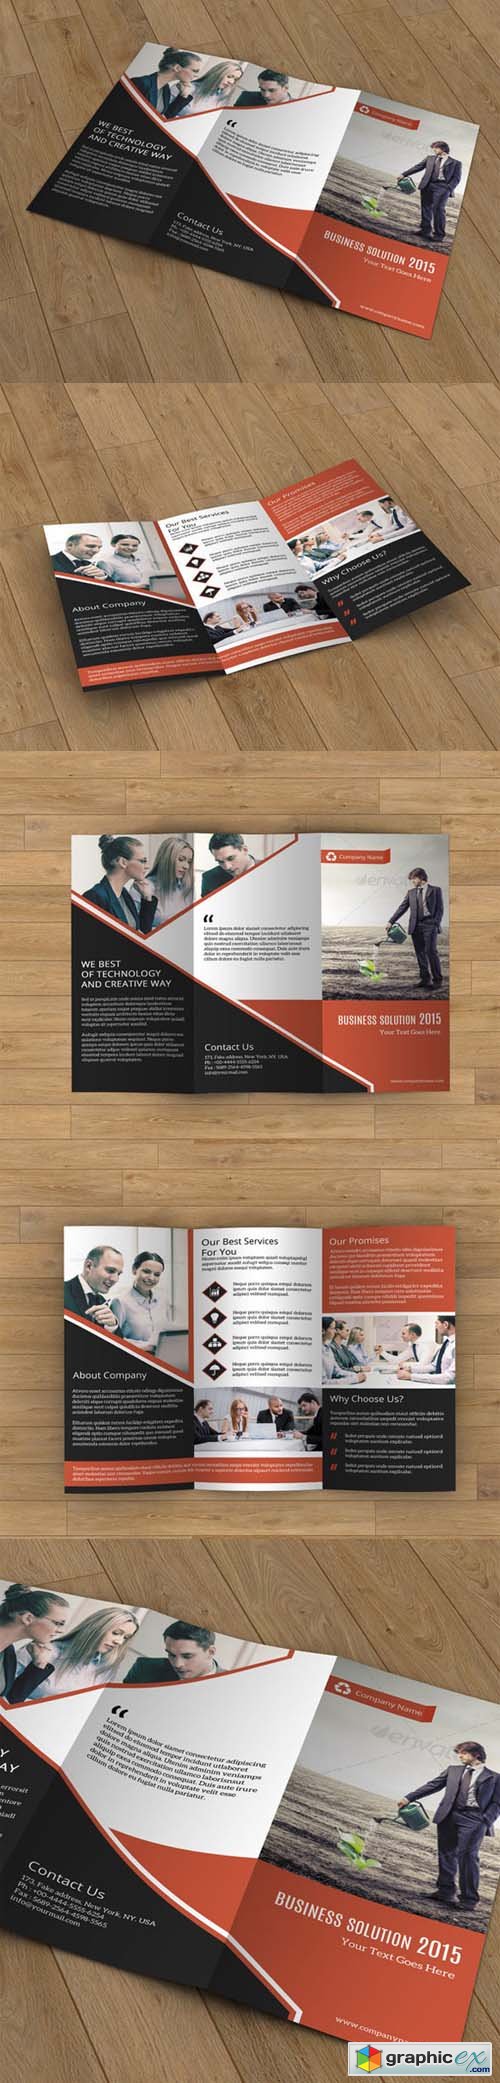 Business Brochure trifold